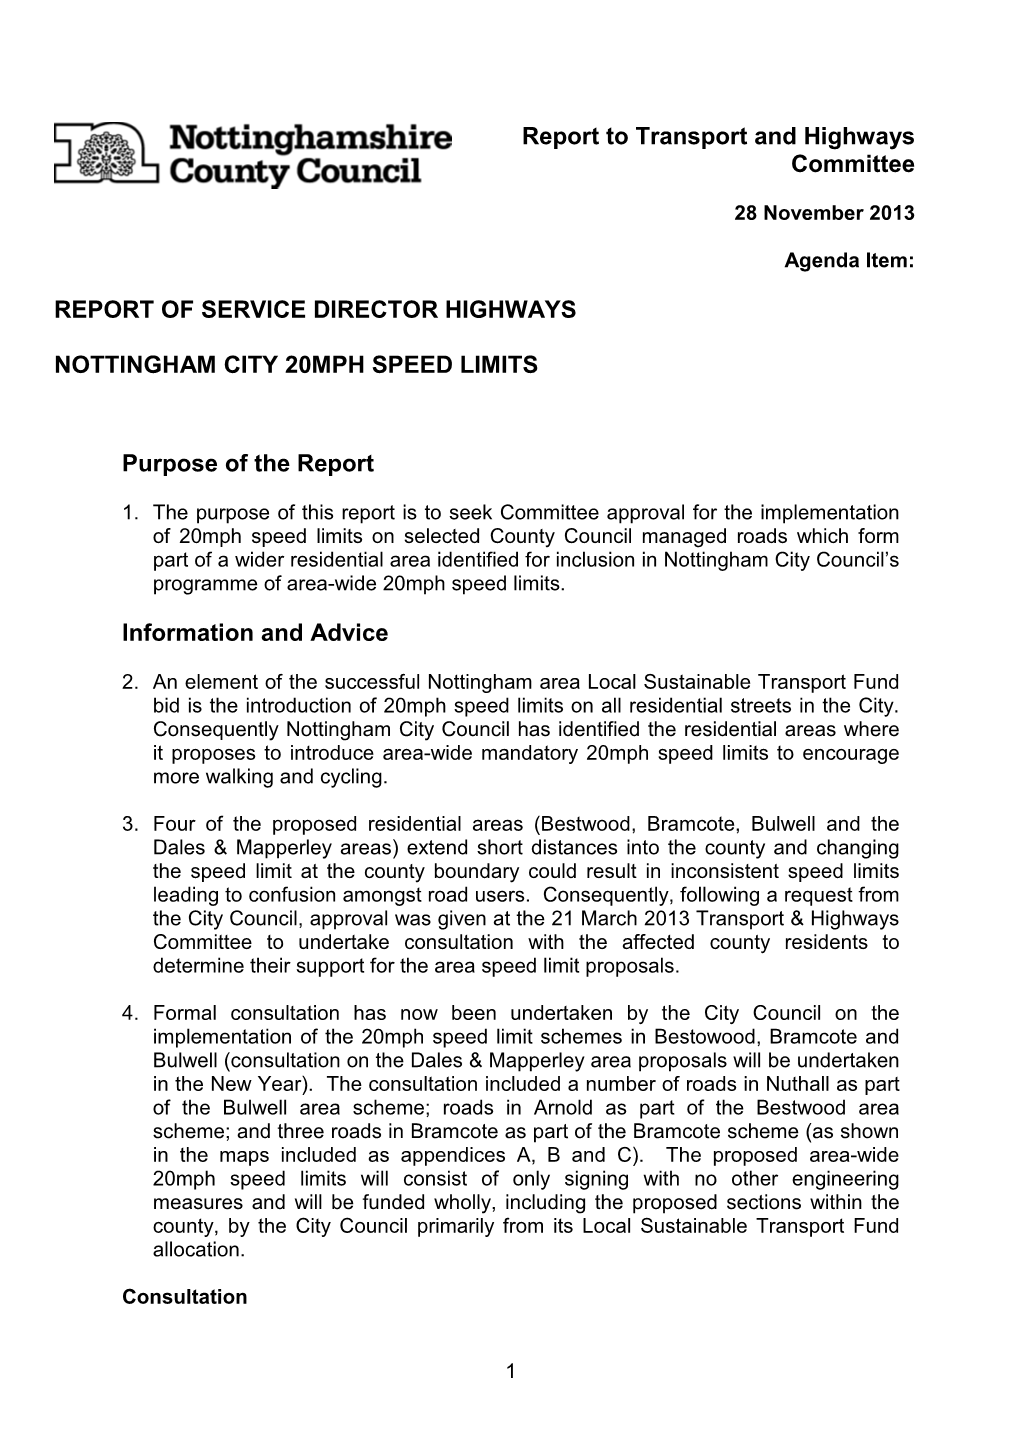 Report to Transport and Highways Committee REPORT of SERVICE